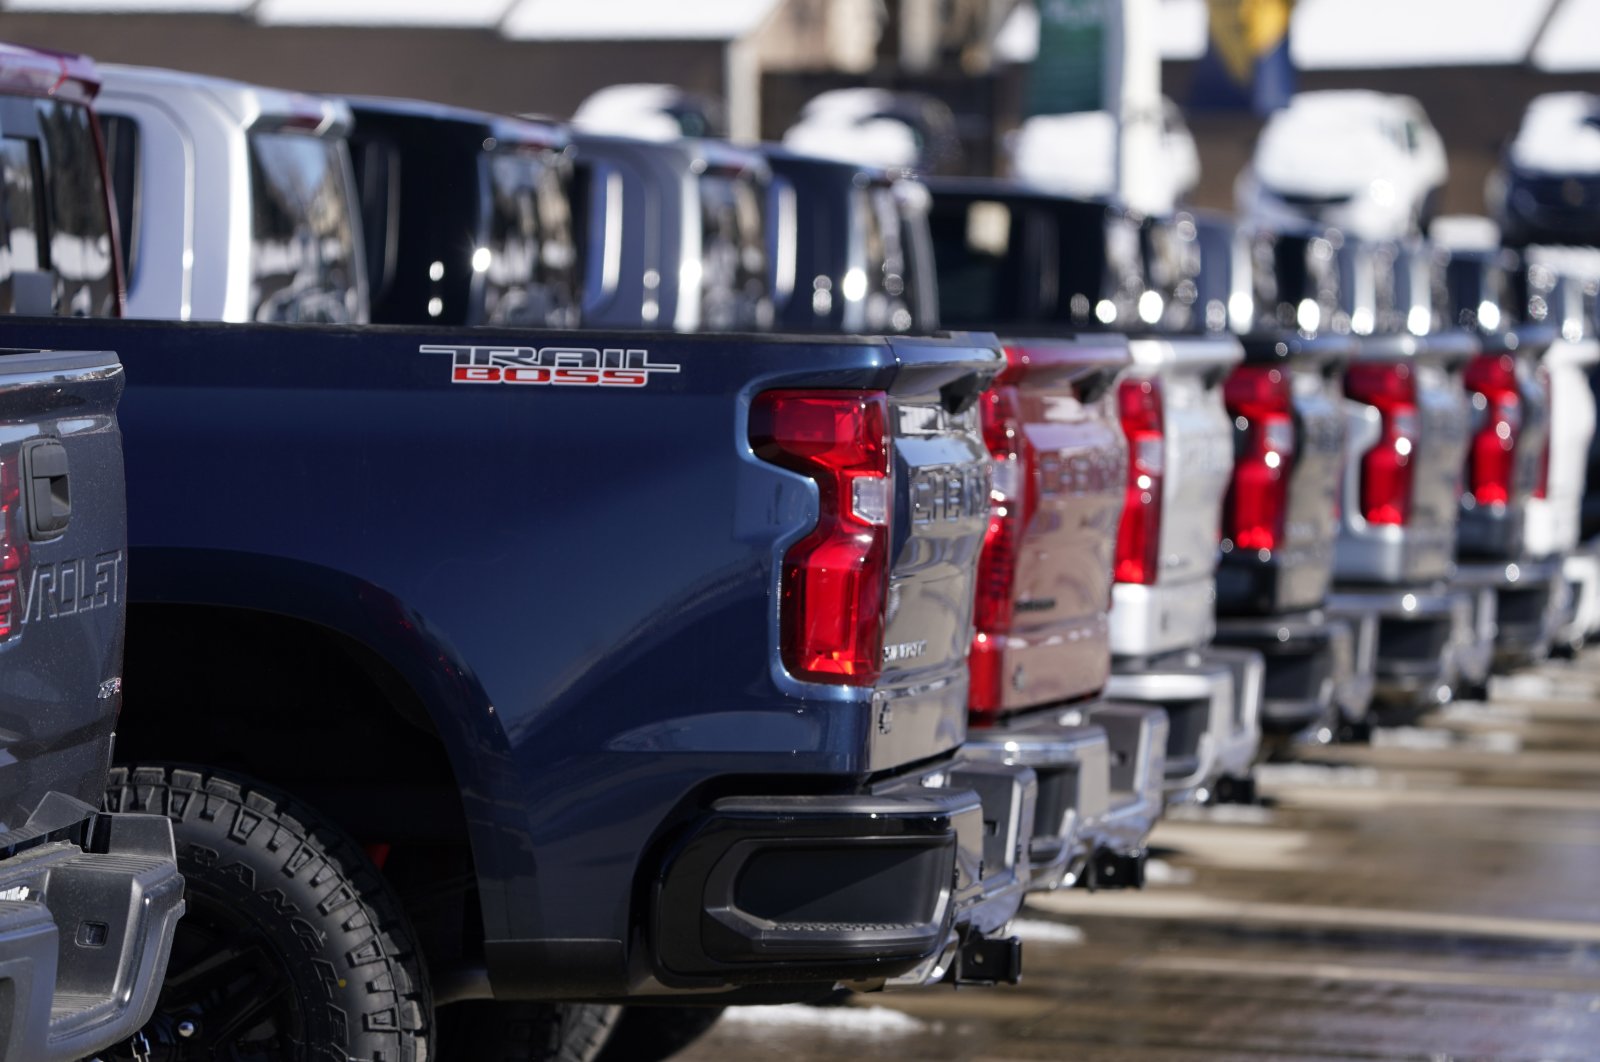 A long line of unsold 2021 Silverado pickup trucks sits at a Chevrolet dealership in Englewood, U.S., Feb. 21, 2021. (AP Photo)